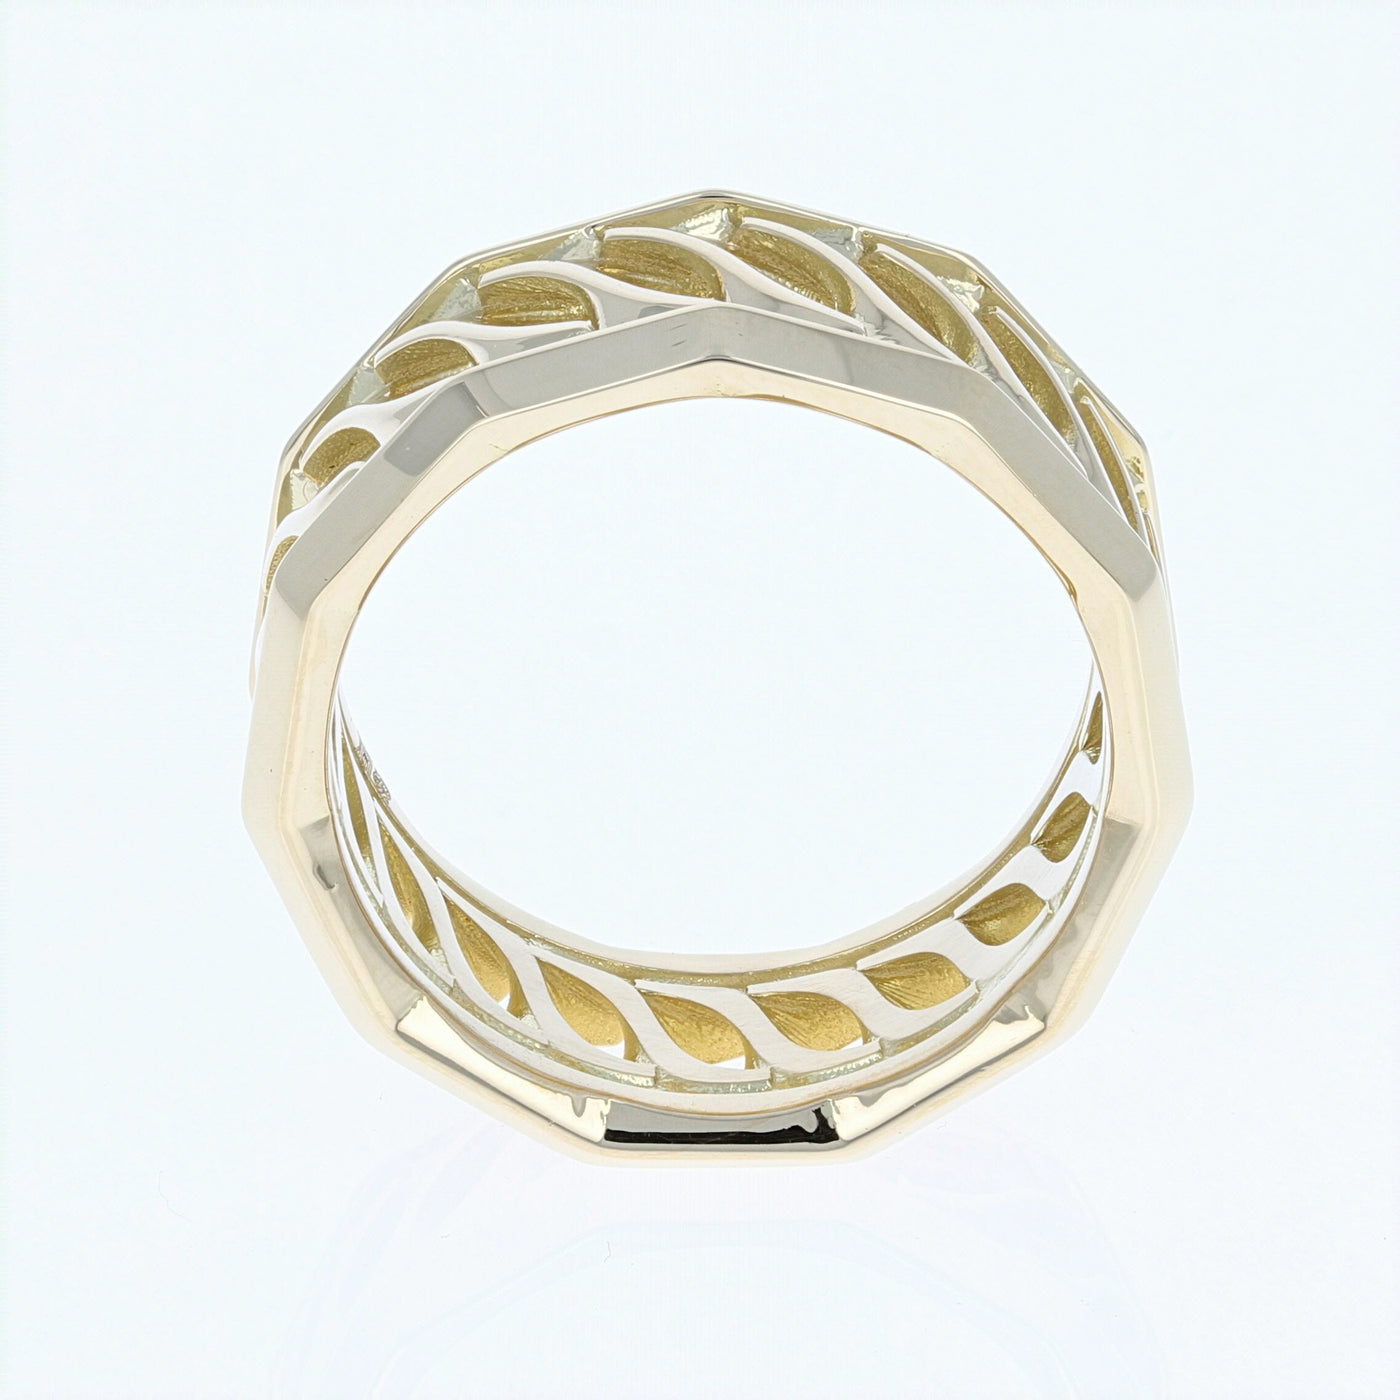 Apparel & Accessories > Jewelry > Rings Lance Pierce Sidewinder Band in 18Kt Yellow Gold